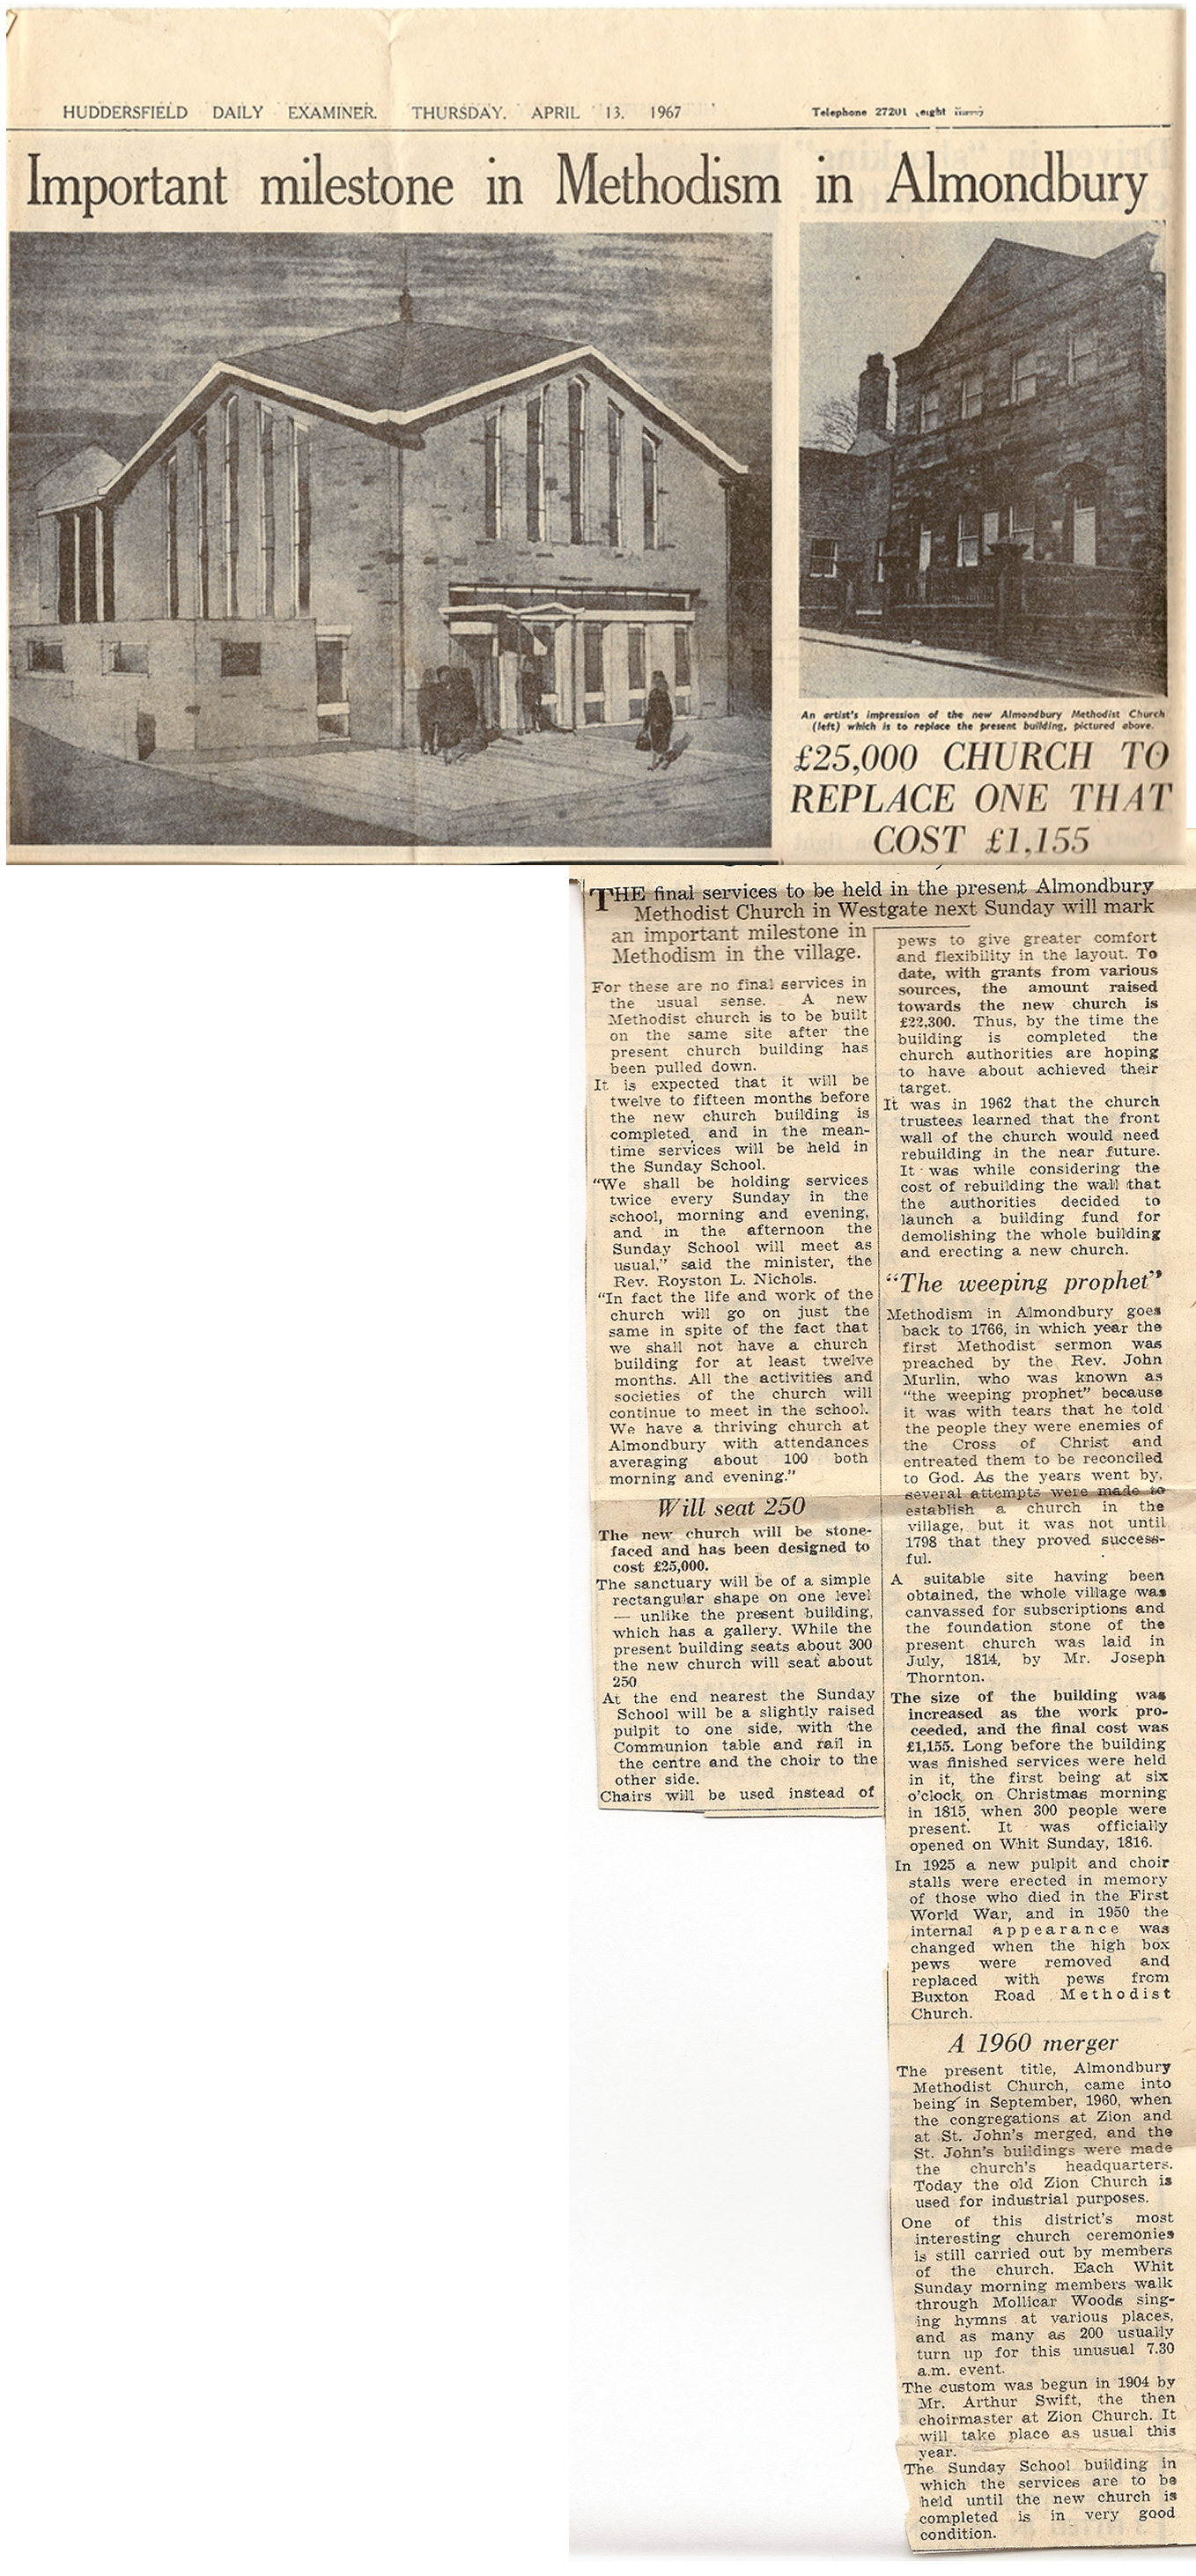 Newspaper article about Almondbury Methodist Church from Huddersfield Examiner 13th June 1967